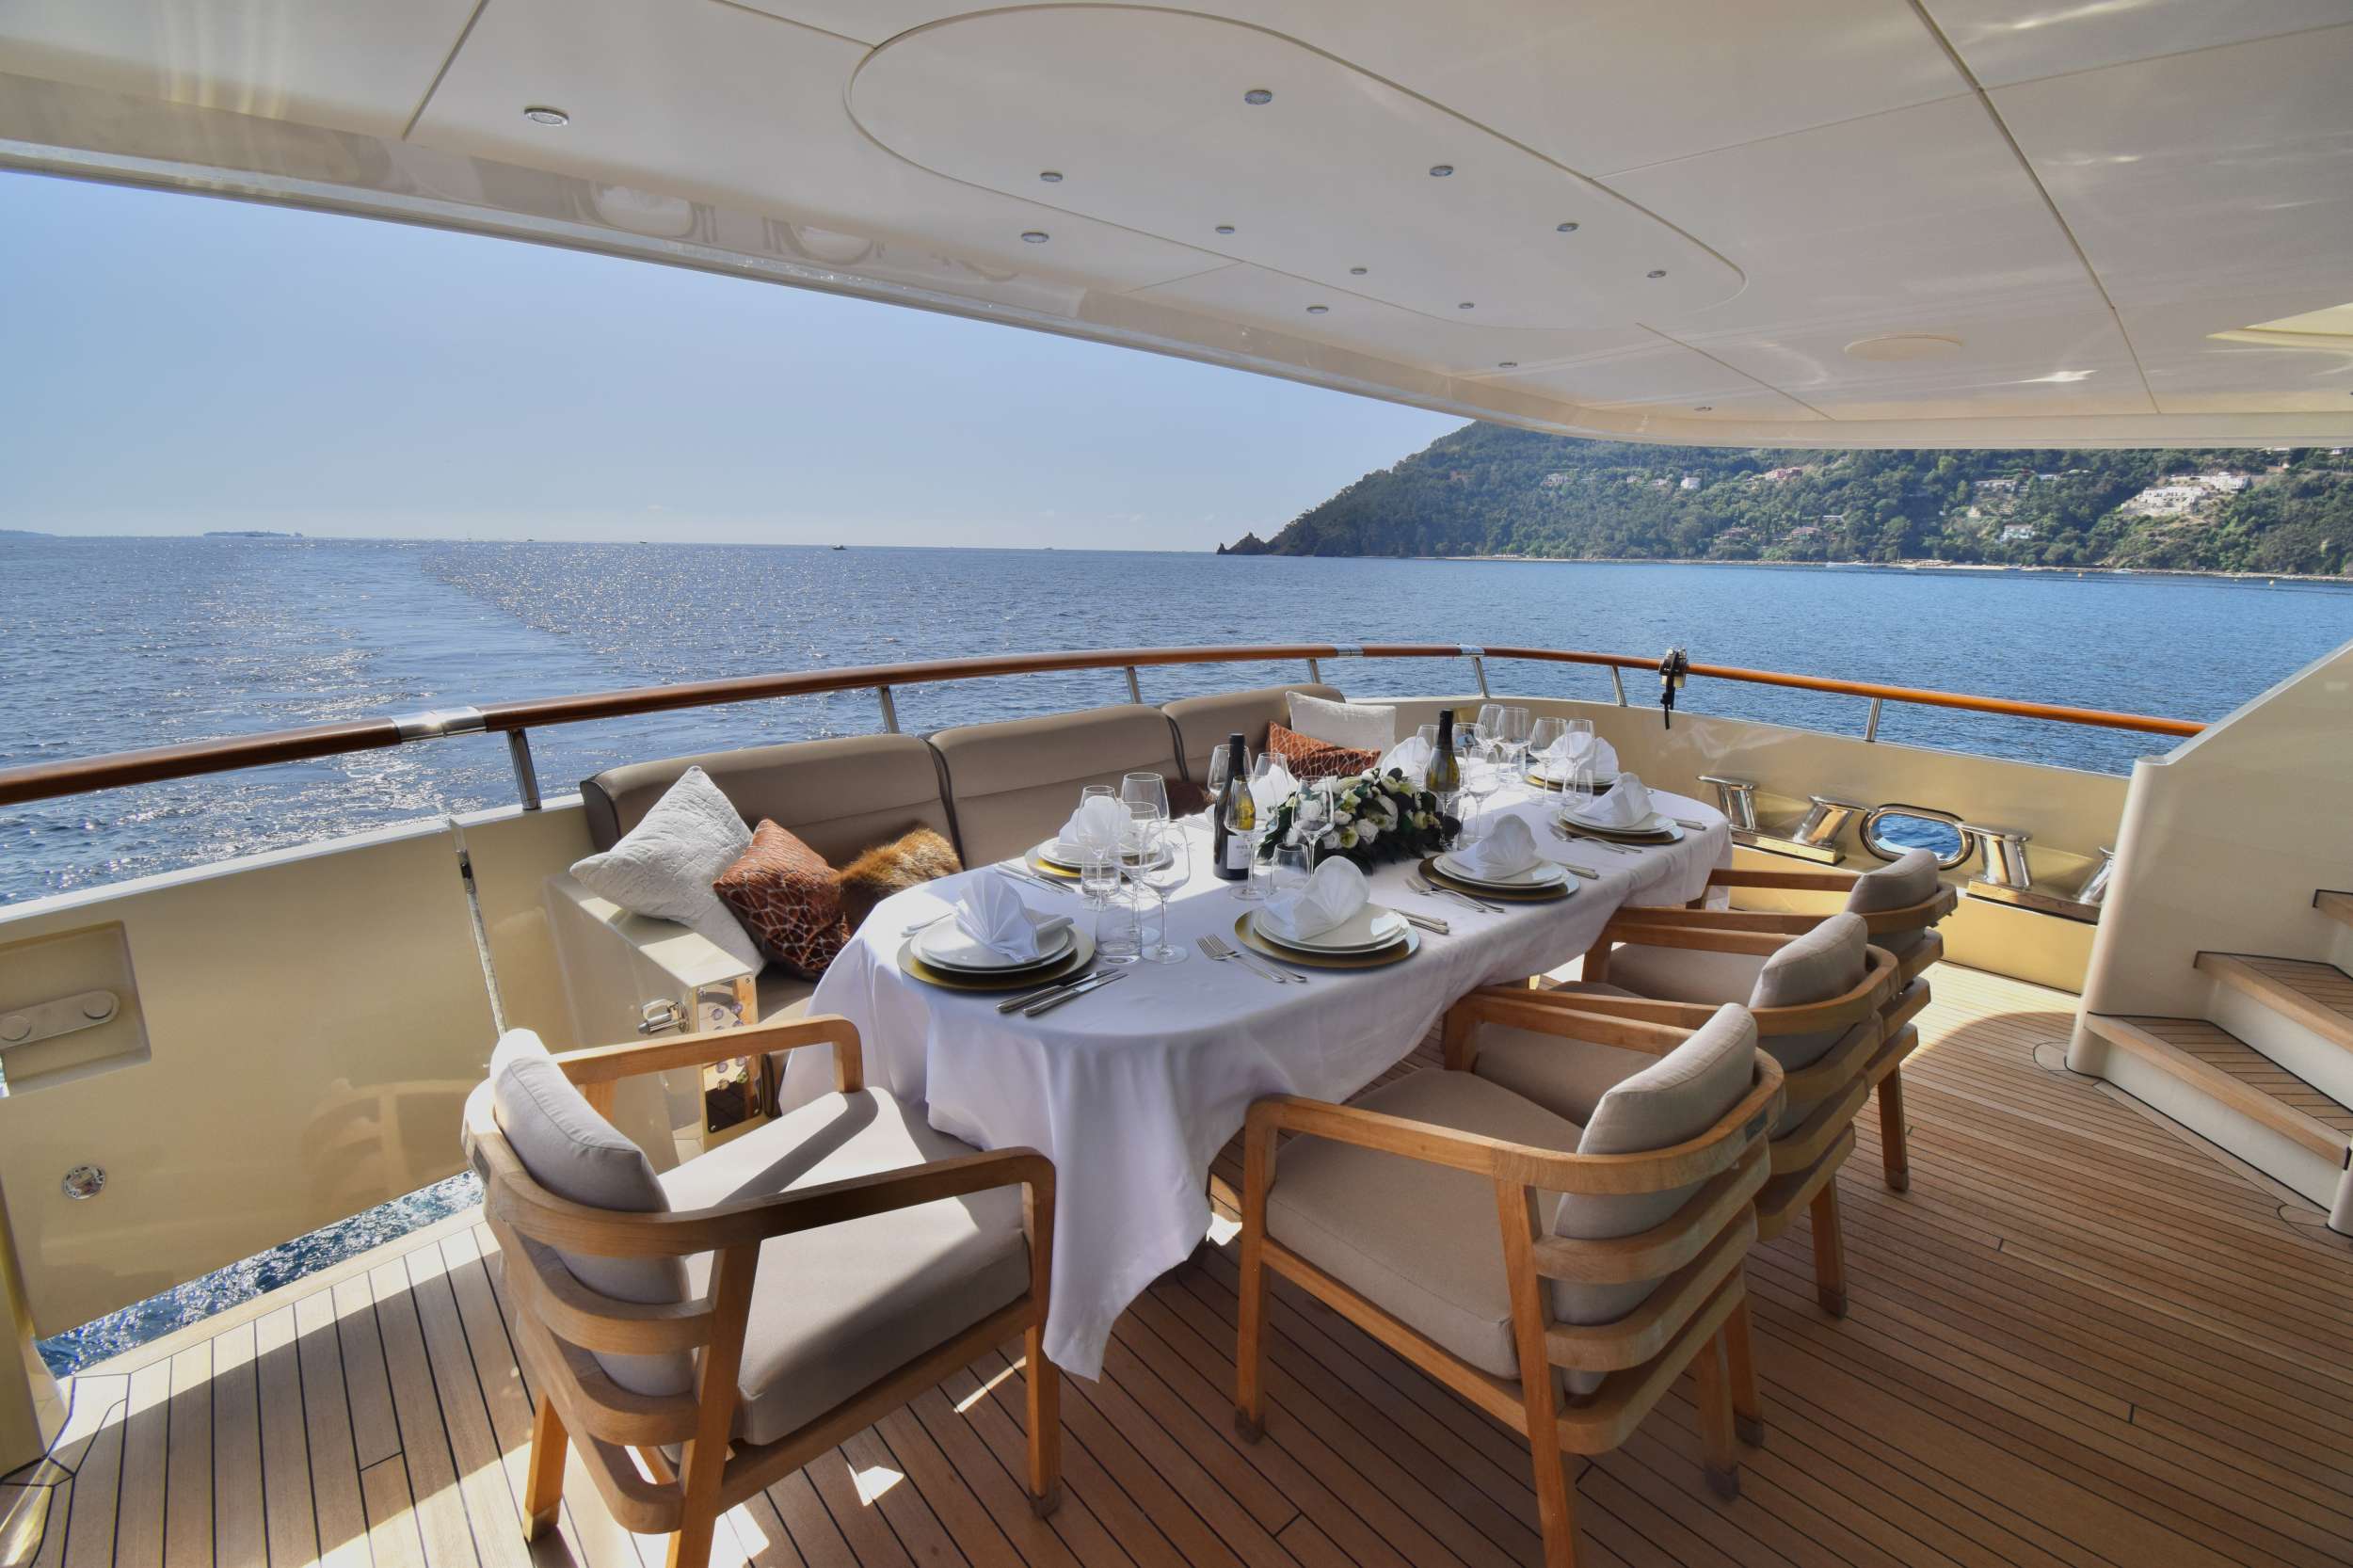 ORIZZONTE - Luxury yacht charter Montenegro & Boat hire in W. Med -Naples/Sicily, W. Med -Riviera/Cors/Sard., W. Med - Spain/Balearics 3